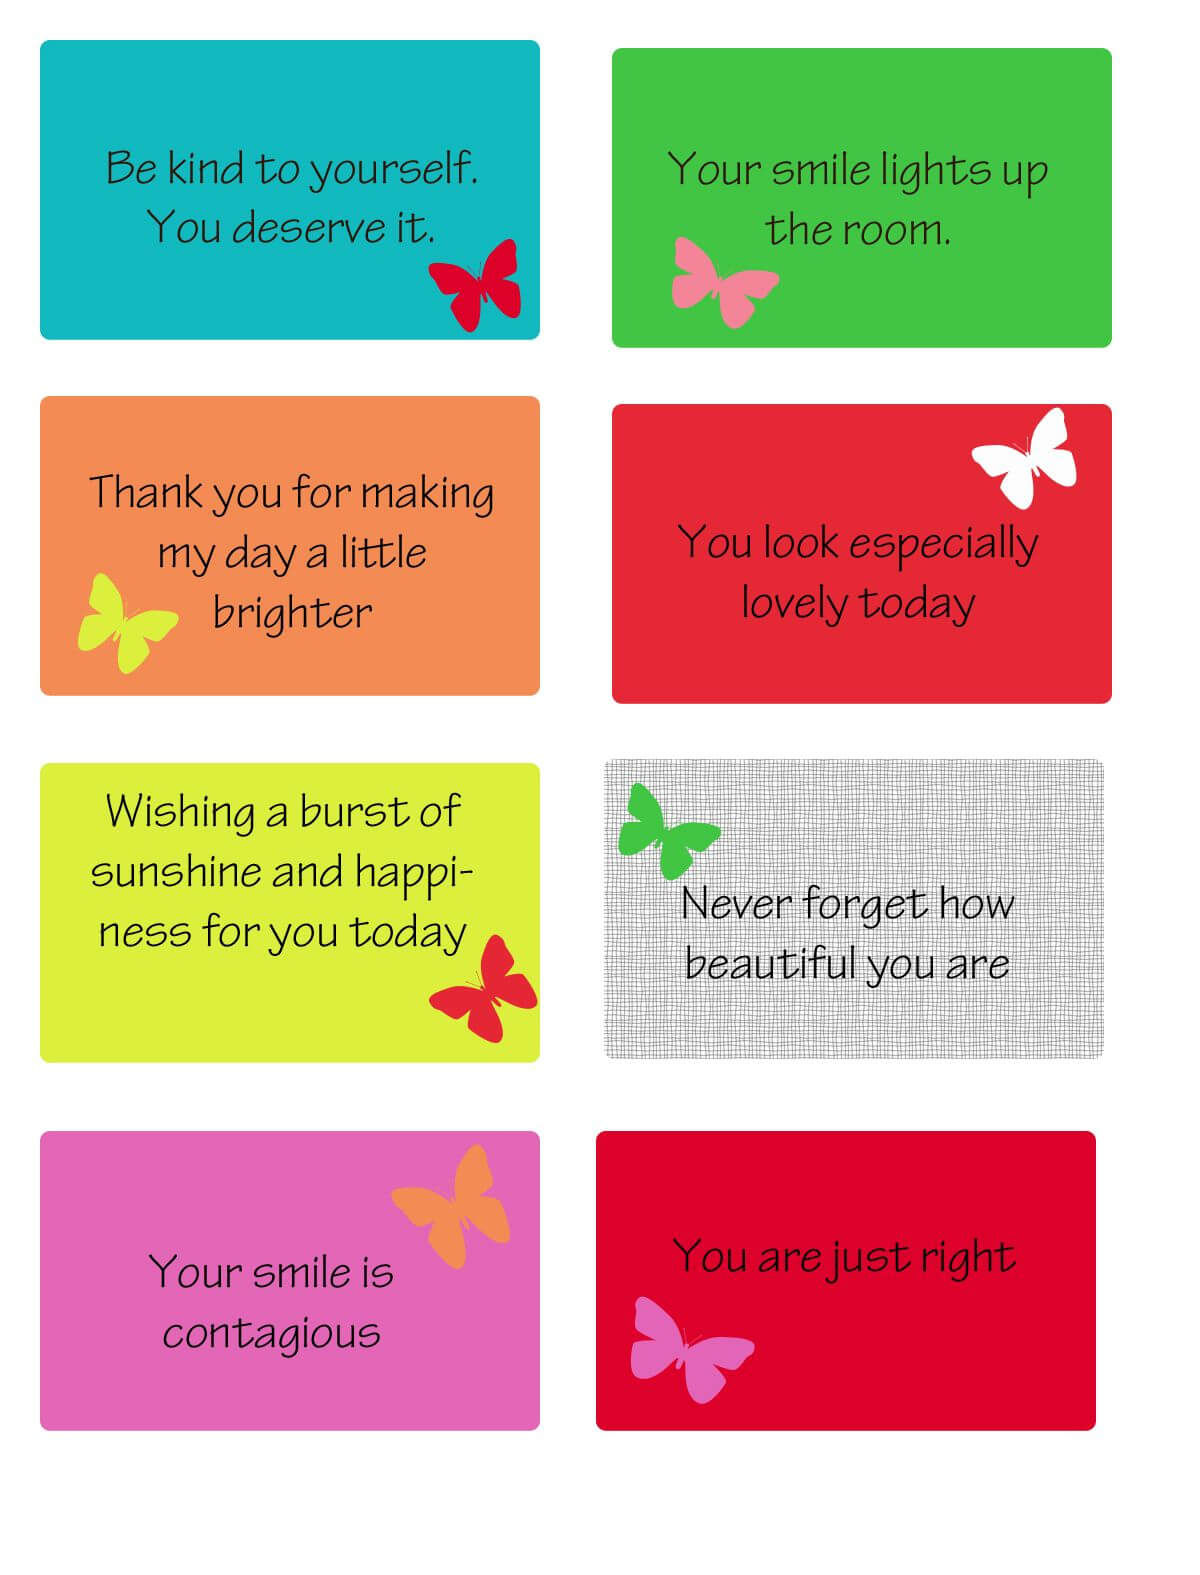 Free Kindness Cards